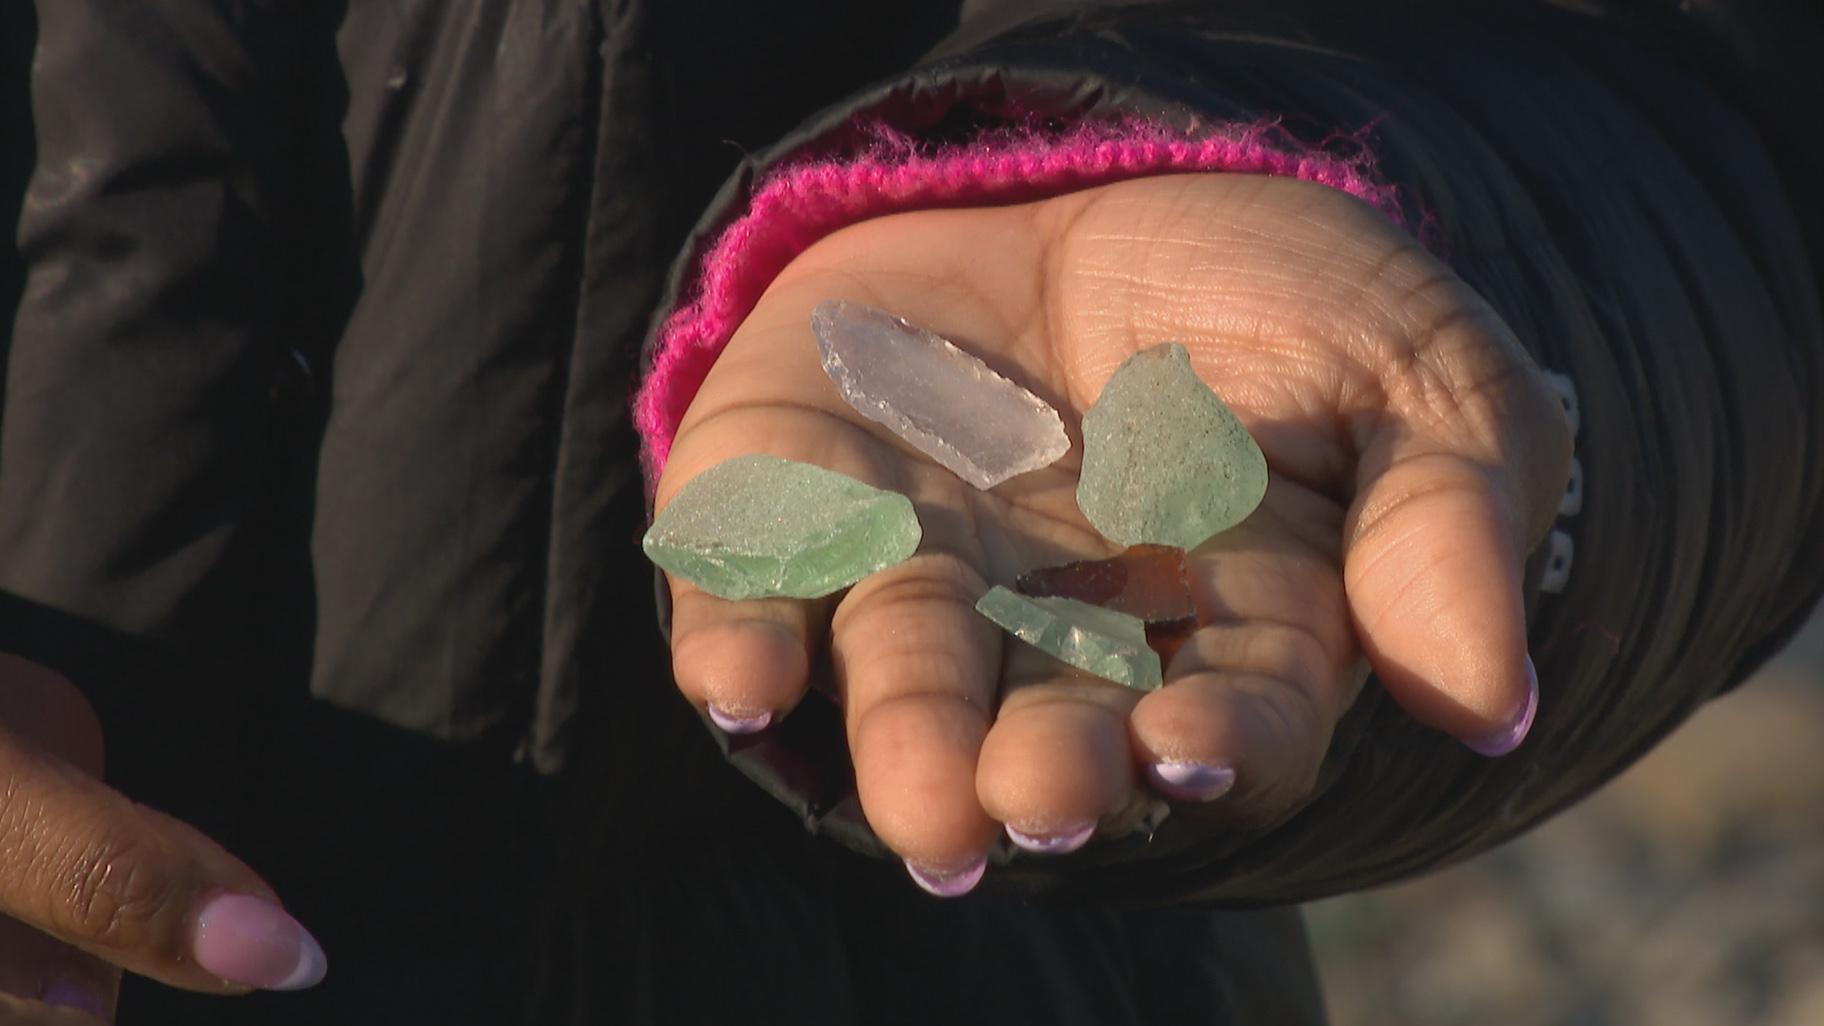 Frosted sea glass. (WTTW News)